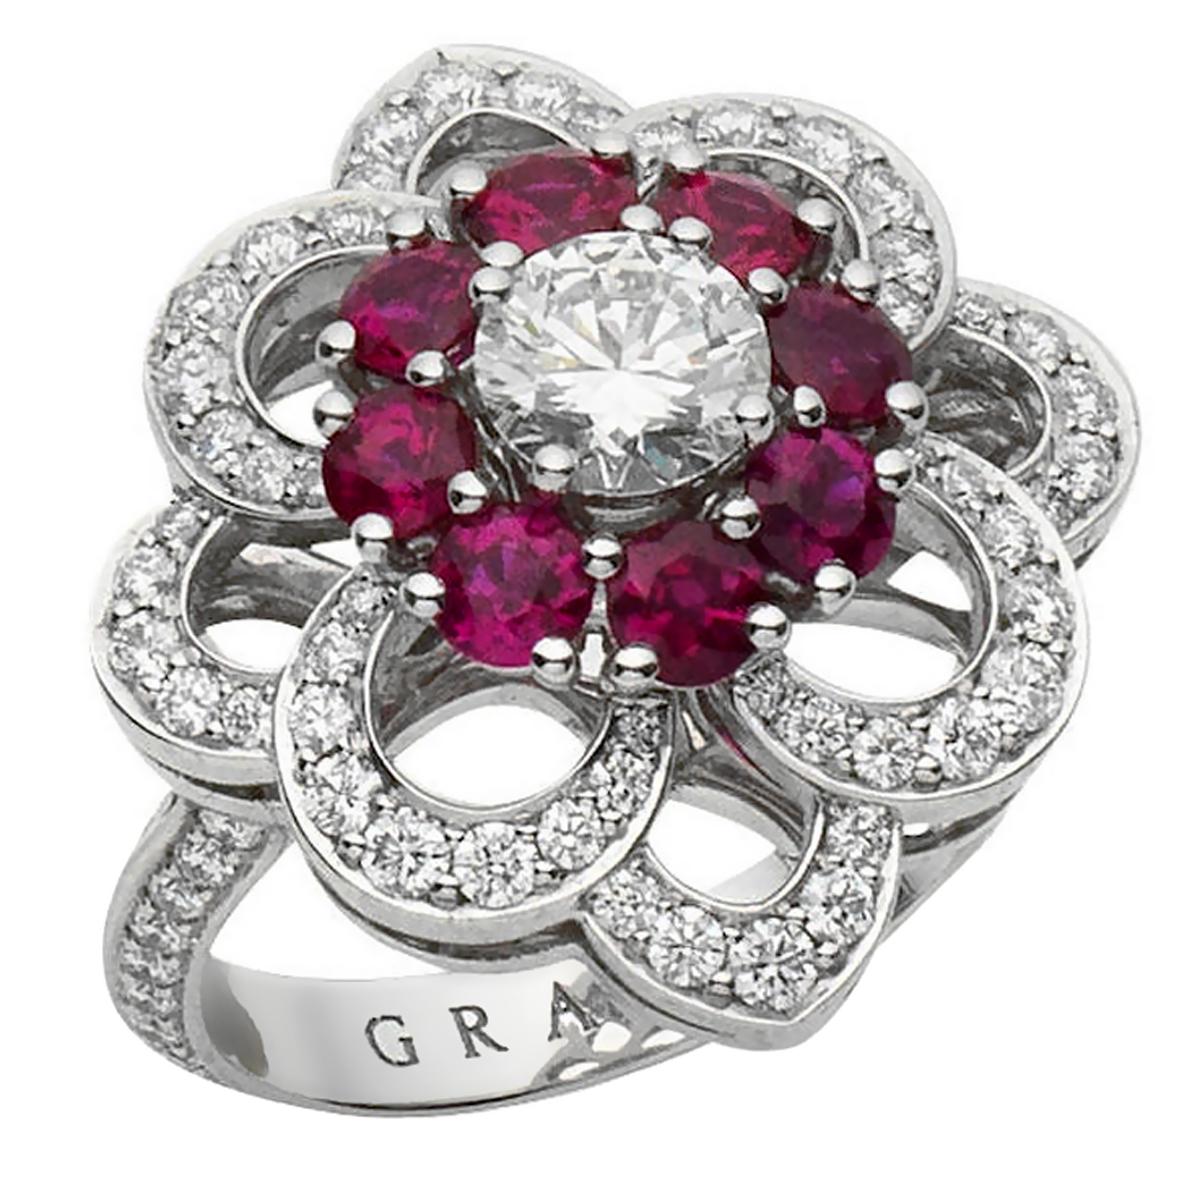 A magnificent Graff diamond cocktail ring showcasing a brilliant-cut diamond and ruby frame ppenwork floral frame. The ring has round brilliant cut diamonds running down both sides of the band mounted in platinum. Signed Graff, with a ring size of 4